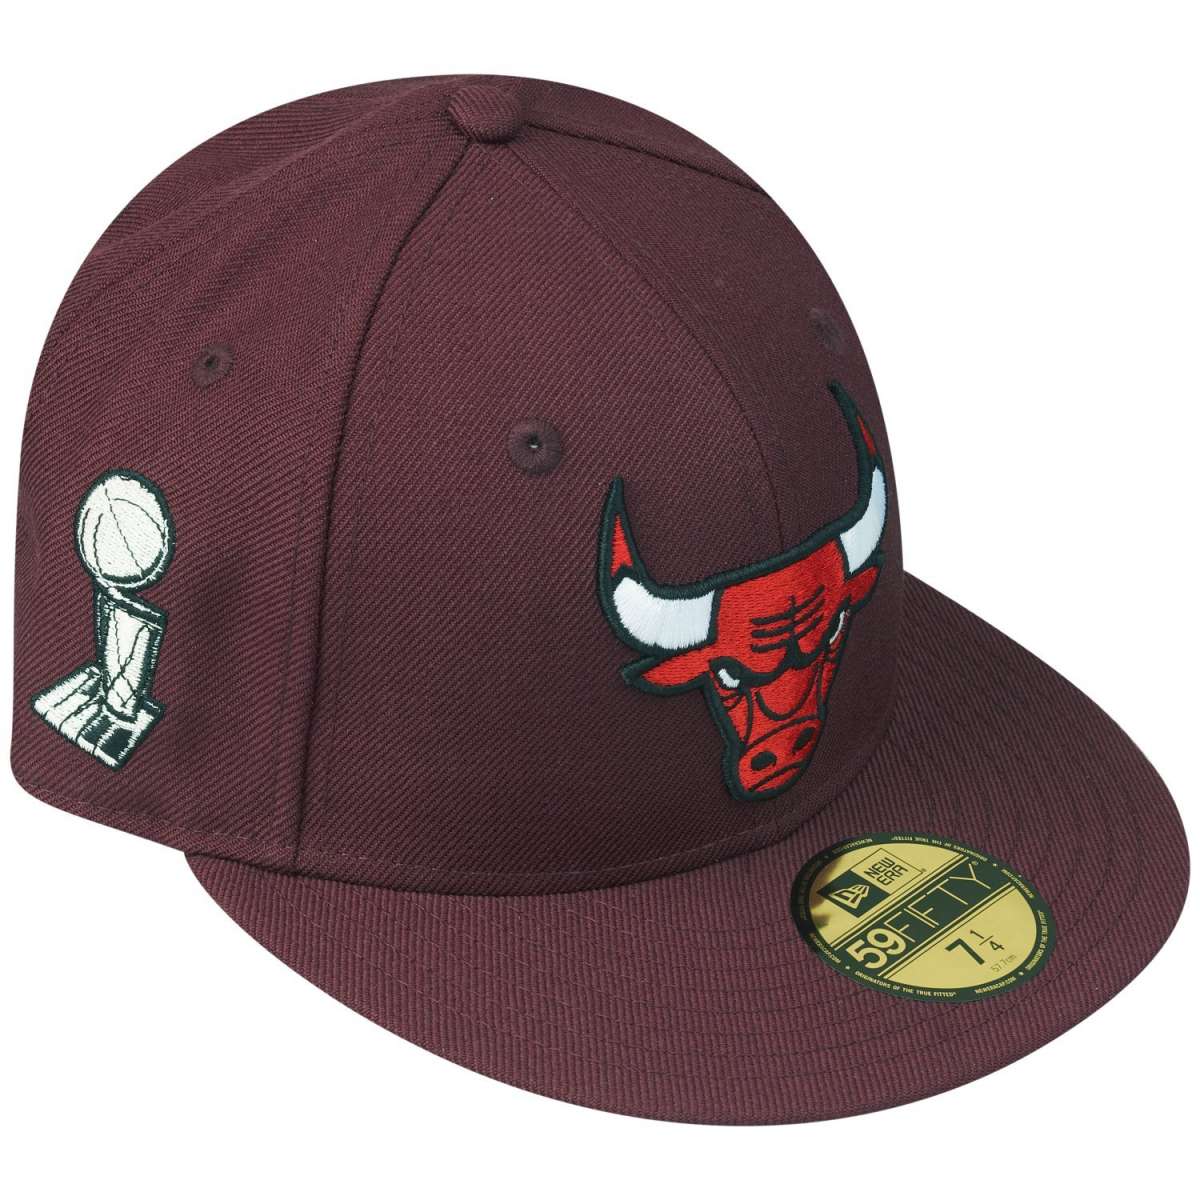 New Era 59Fifty Fitted Cap - Chicago Bulls maroon | Fitted | Caps ...